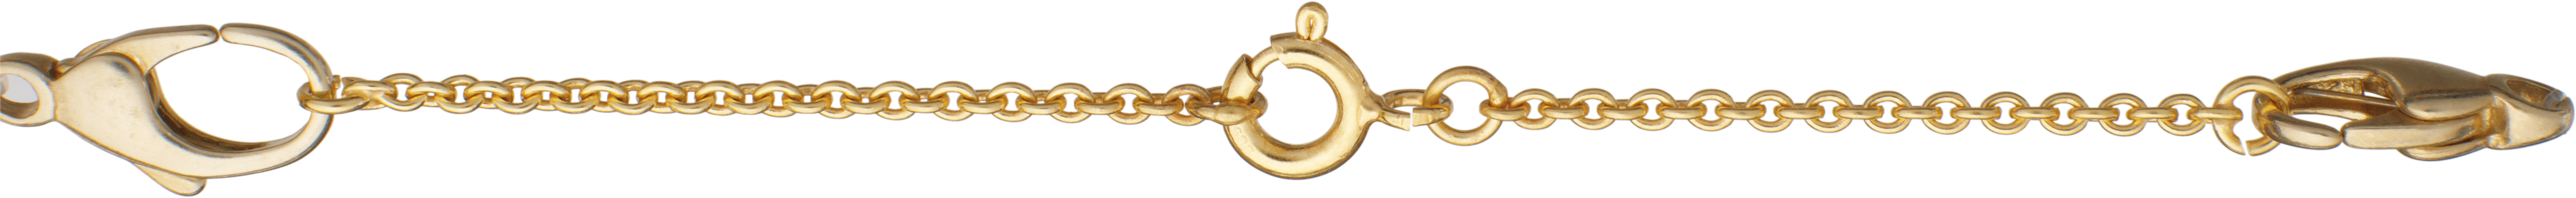 Safety chain anchor gold 333/-Gg length 70,00mm, with spring ring and open jump rings